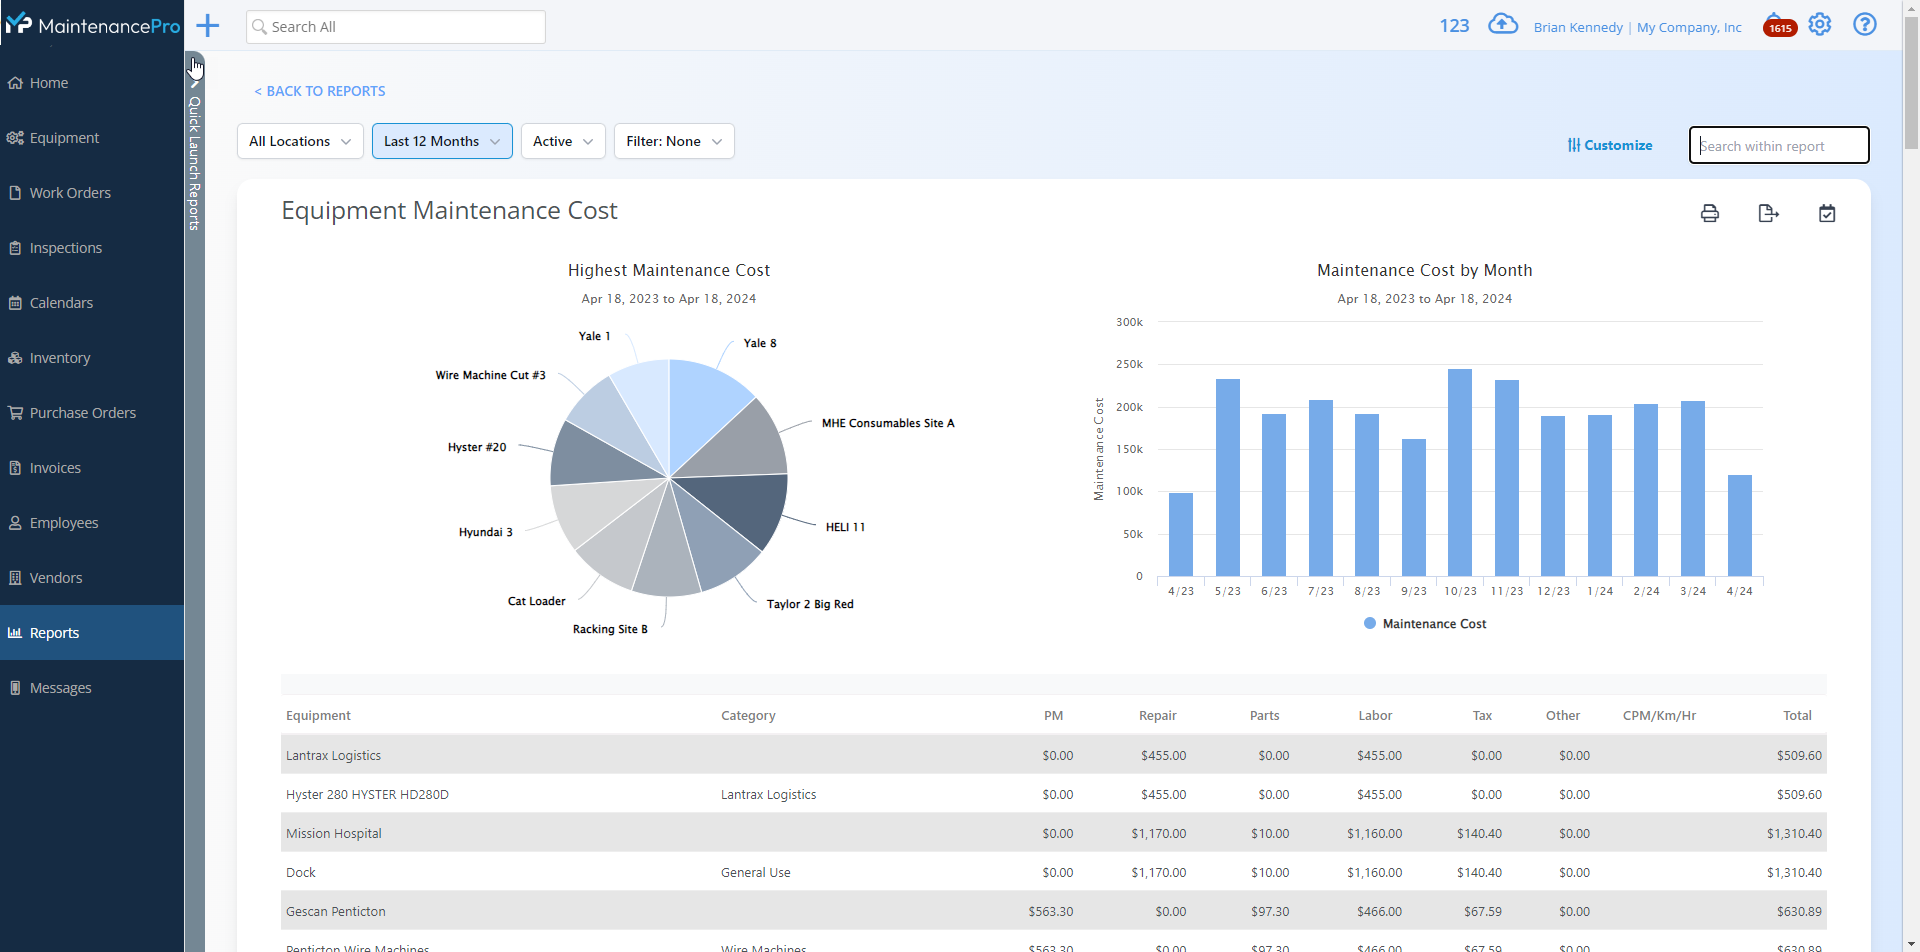 Create extensive reports with charts and detailed information for analysis.